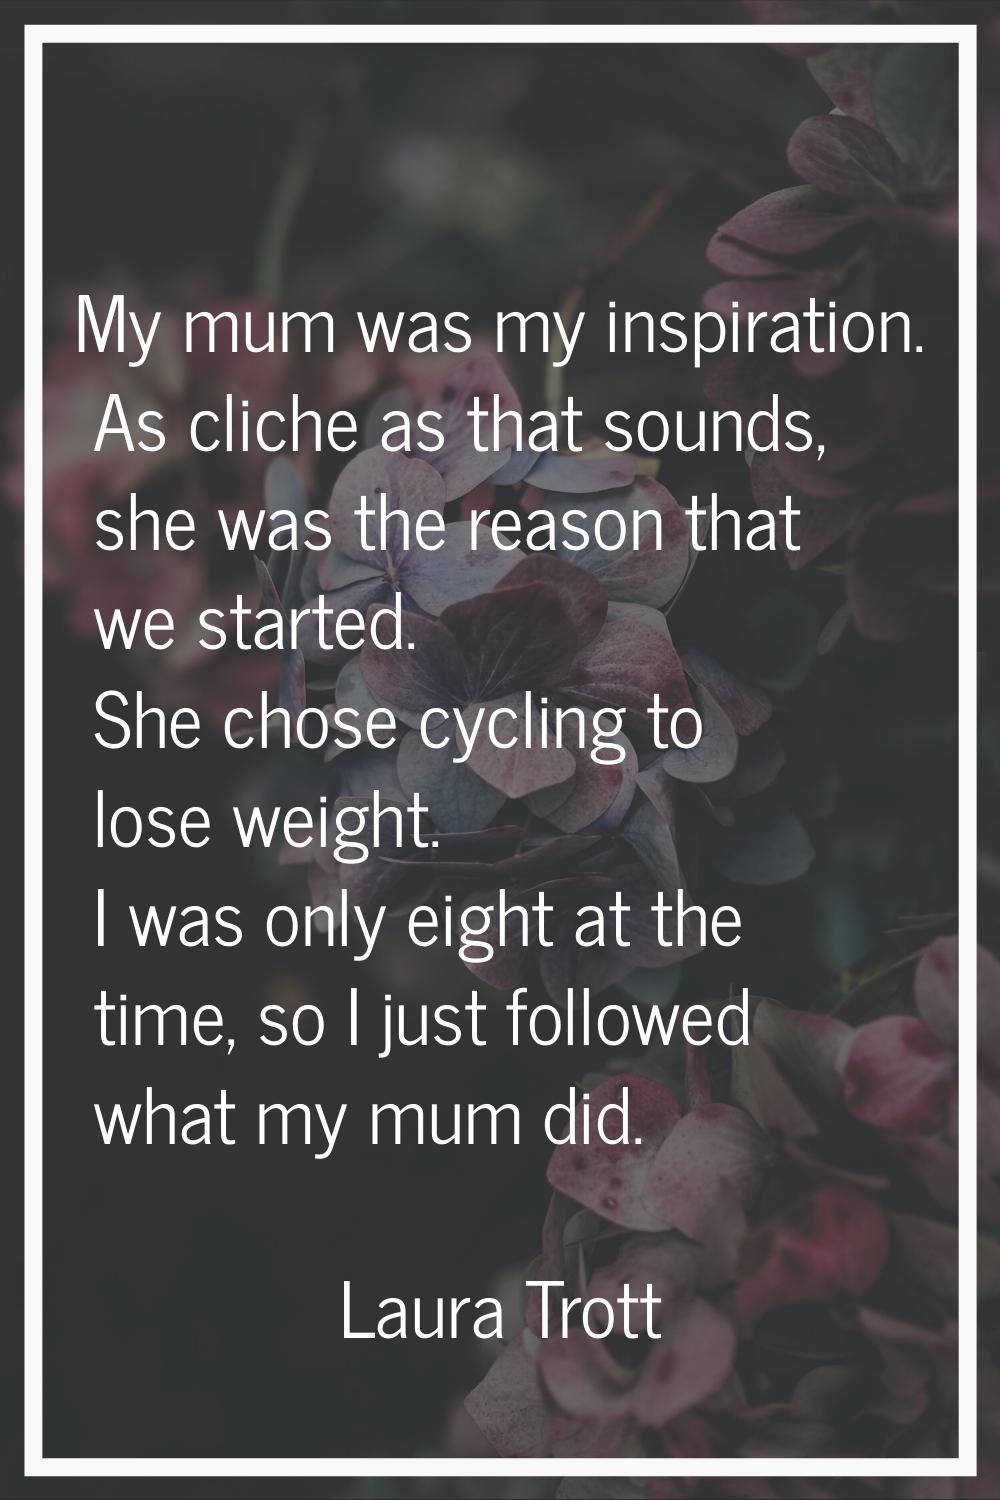 My mum was my inspiration. As cliche as that sounds, she was the reason that we started. She chose 